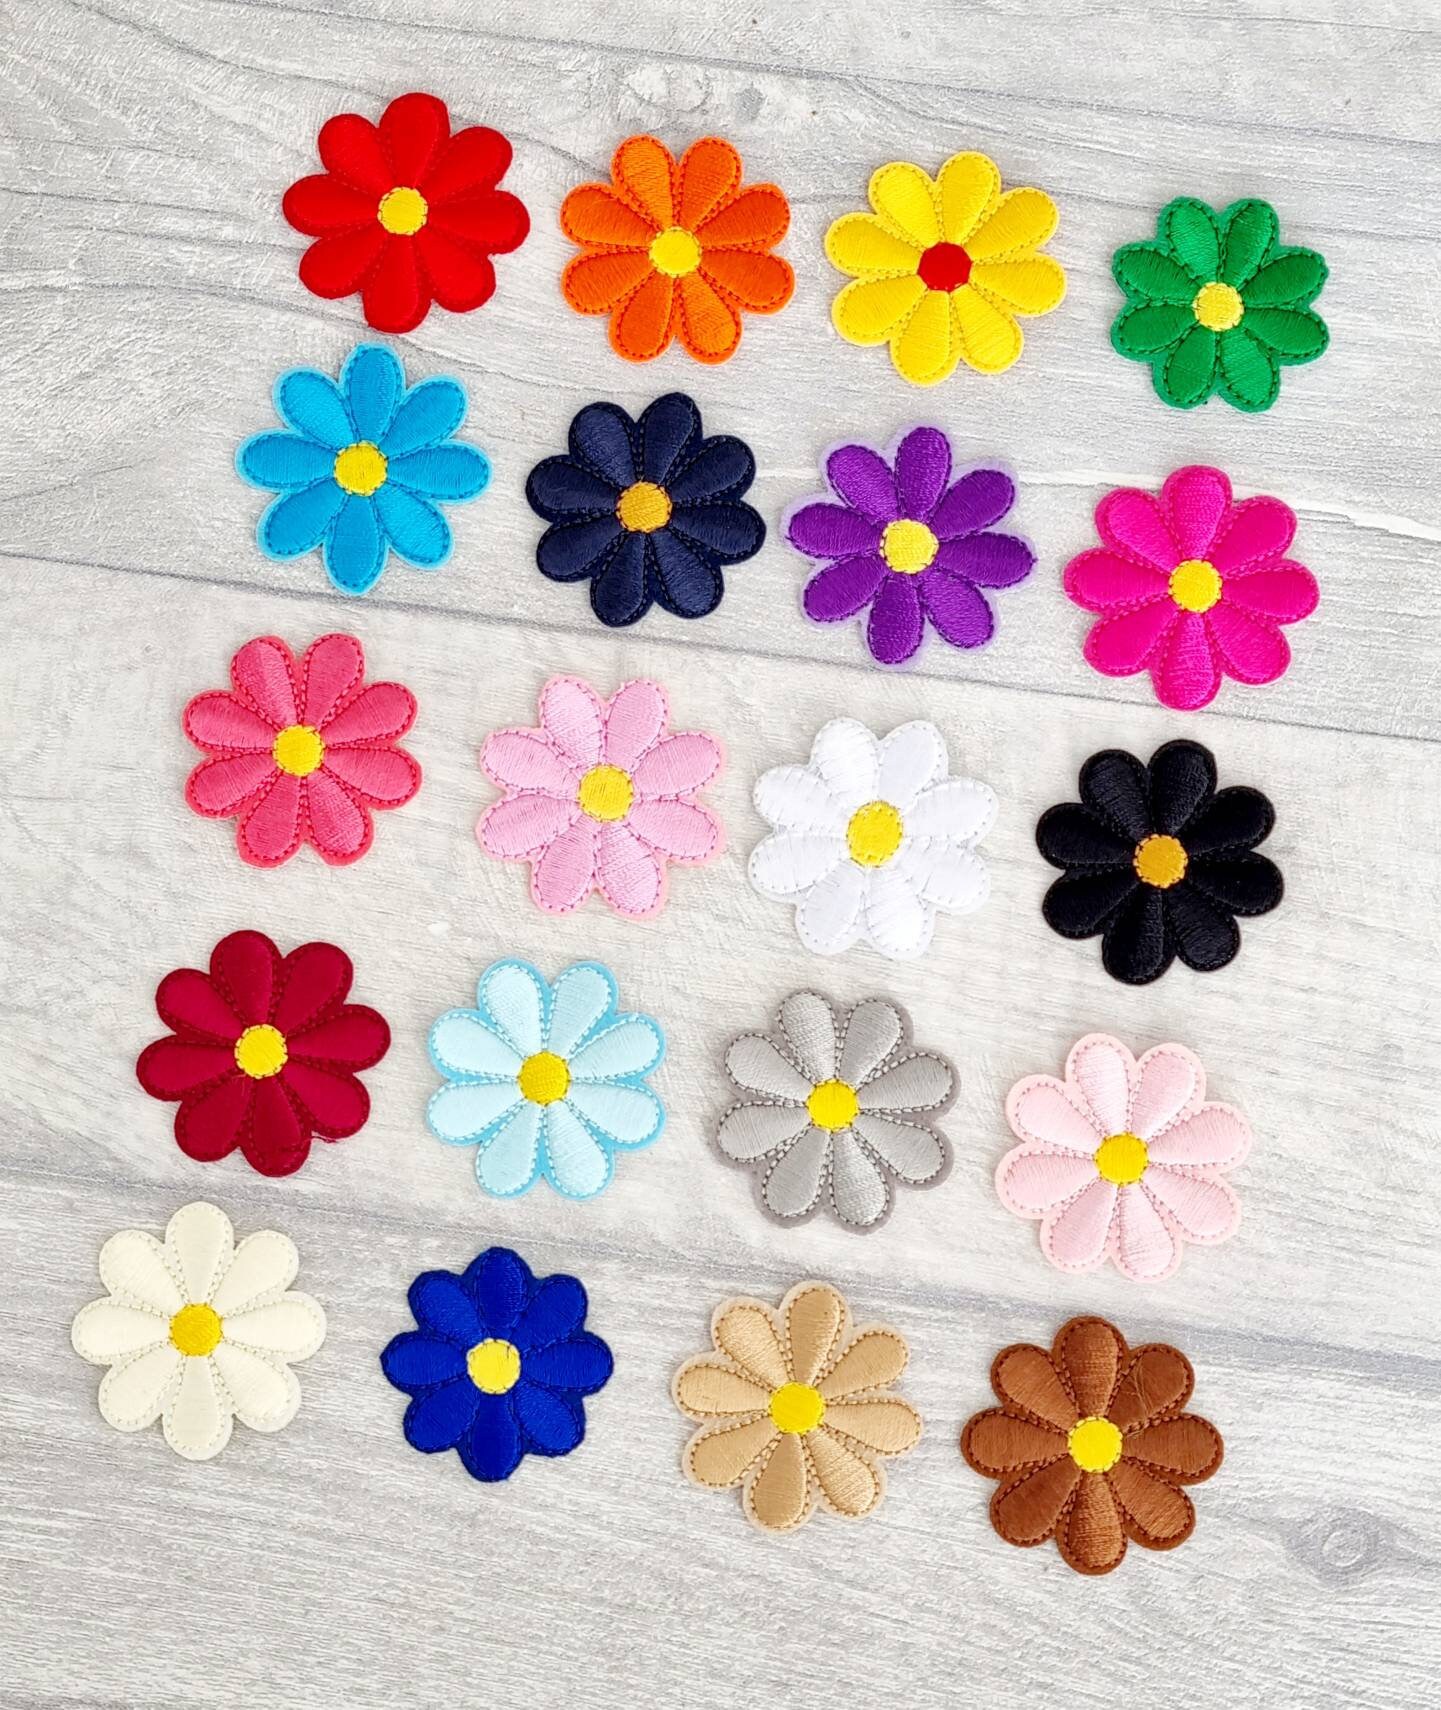 20 Pcs Daisy Ornament Embroidery Patches Flower Applique Backpack Appliques for Clothes, Size: 4x4cm, Other